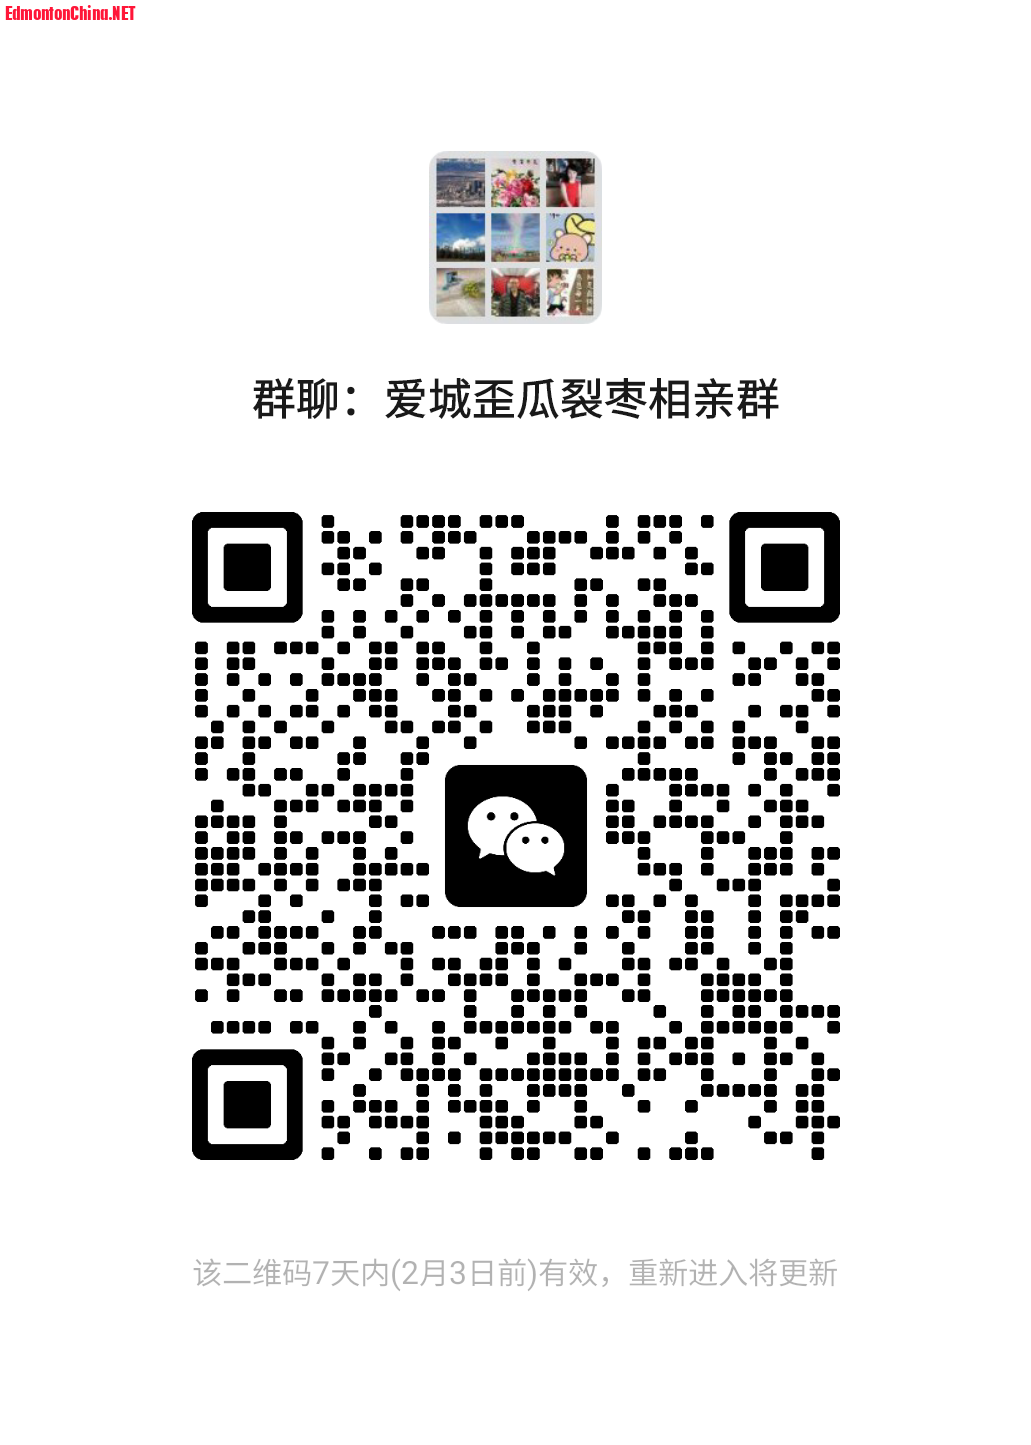 mmqrcode1706377828698.png